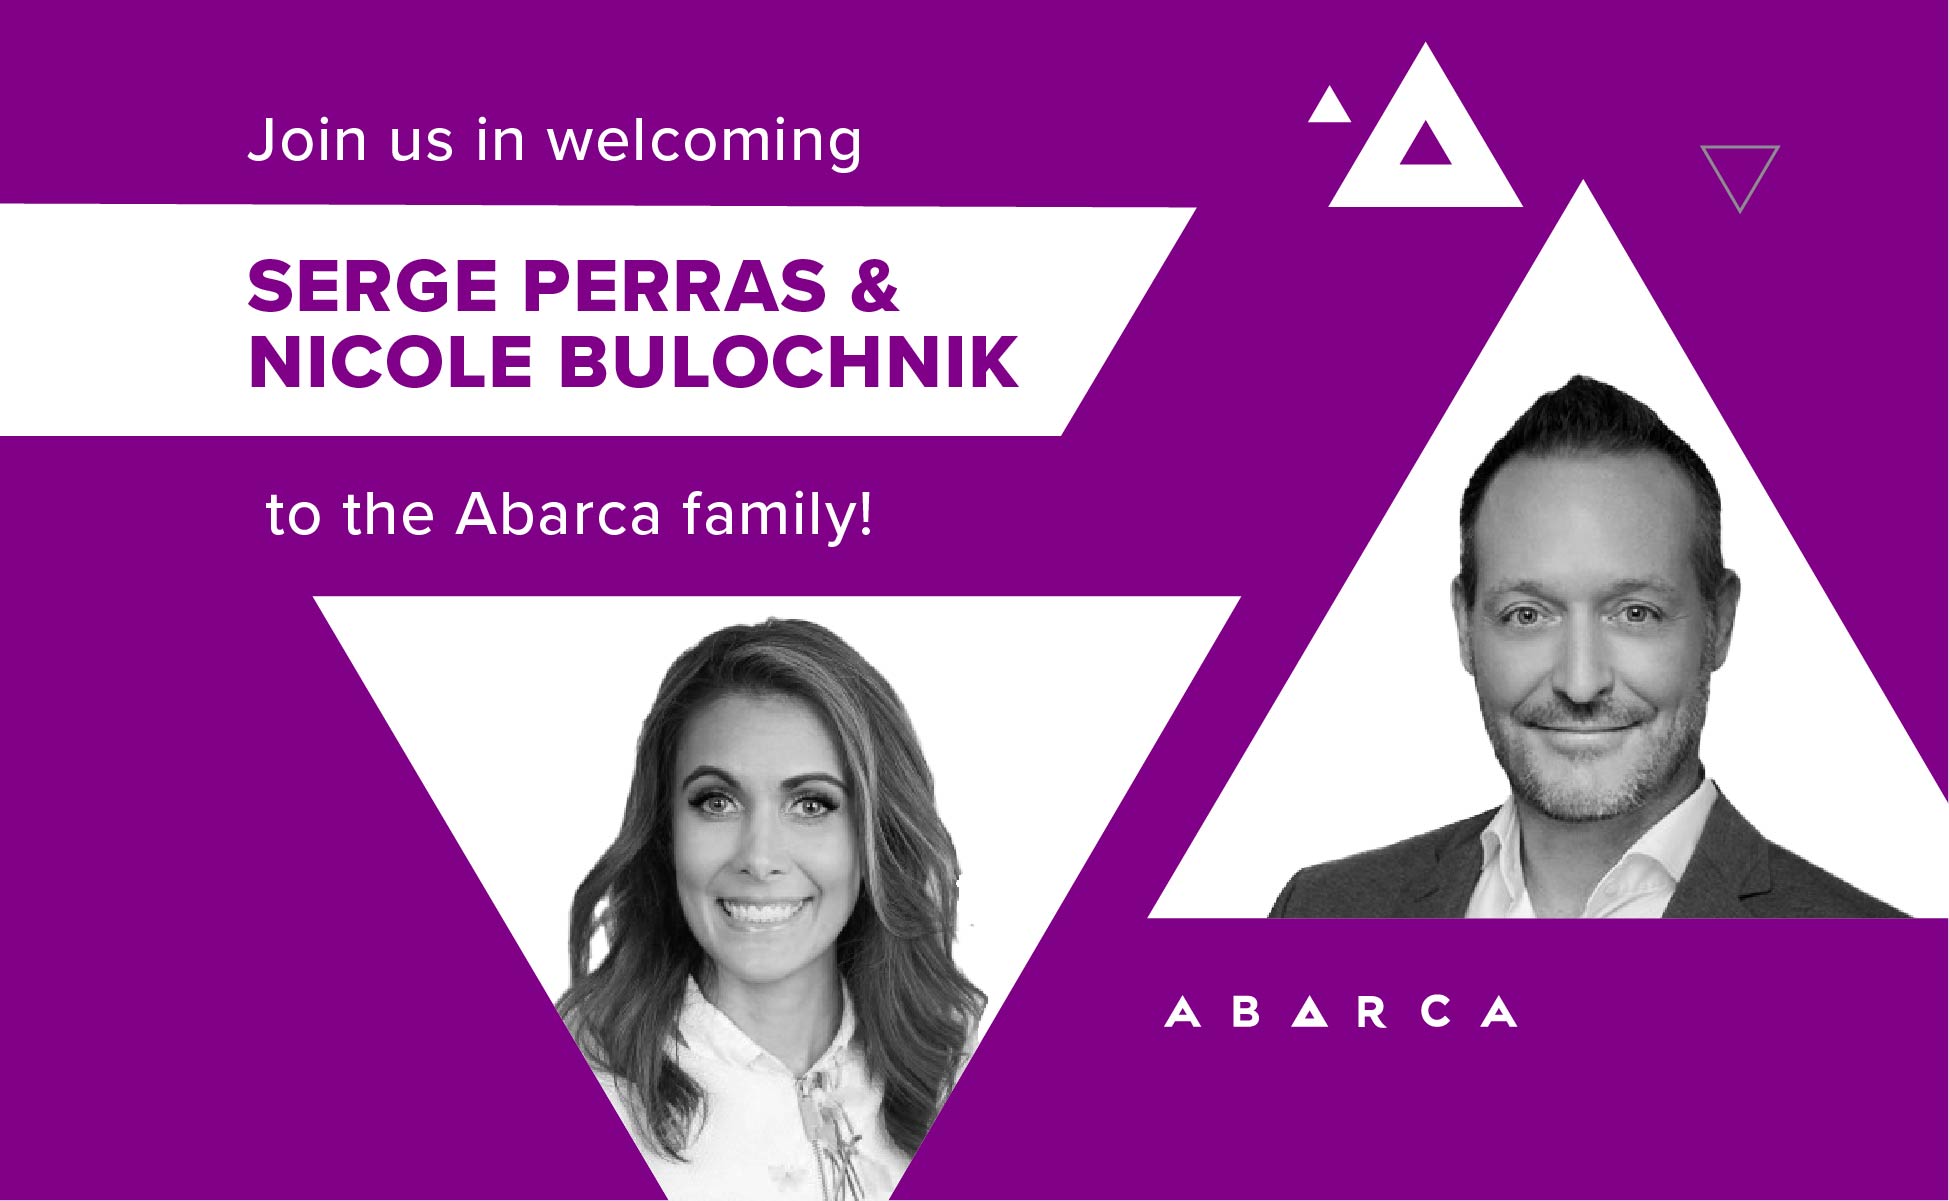 Welcome Serge Perras, Chief Information Officer, and Nicole Bulochnik, VP Drug Pricing!